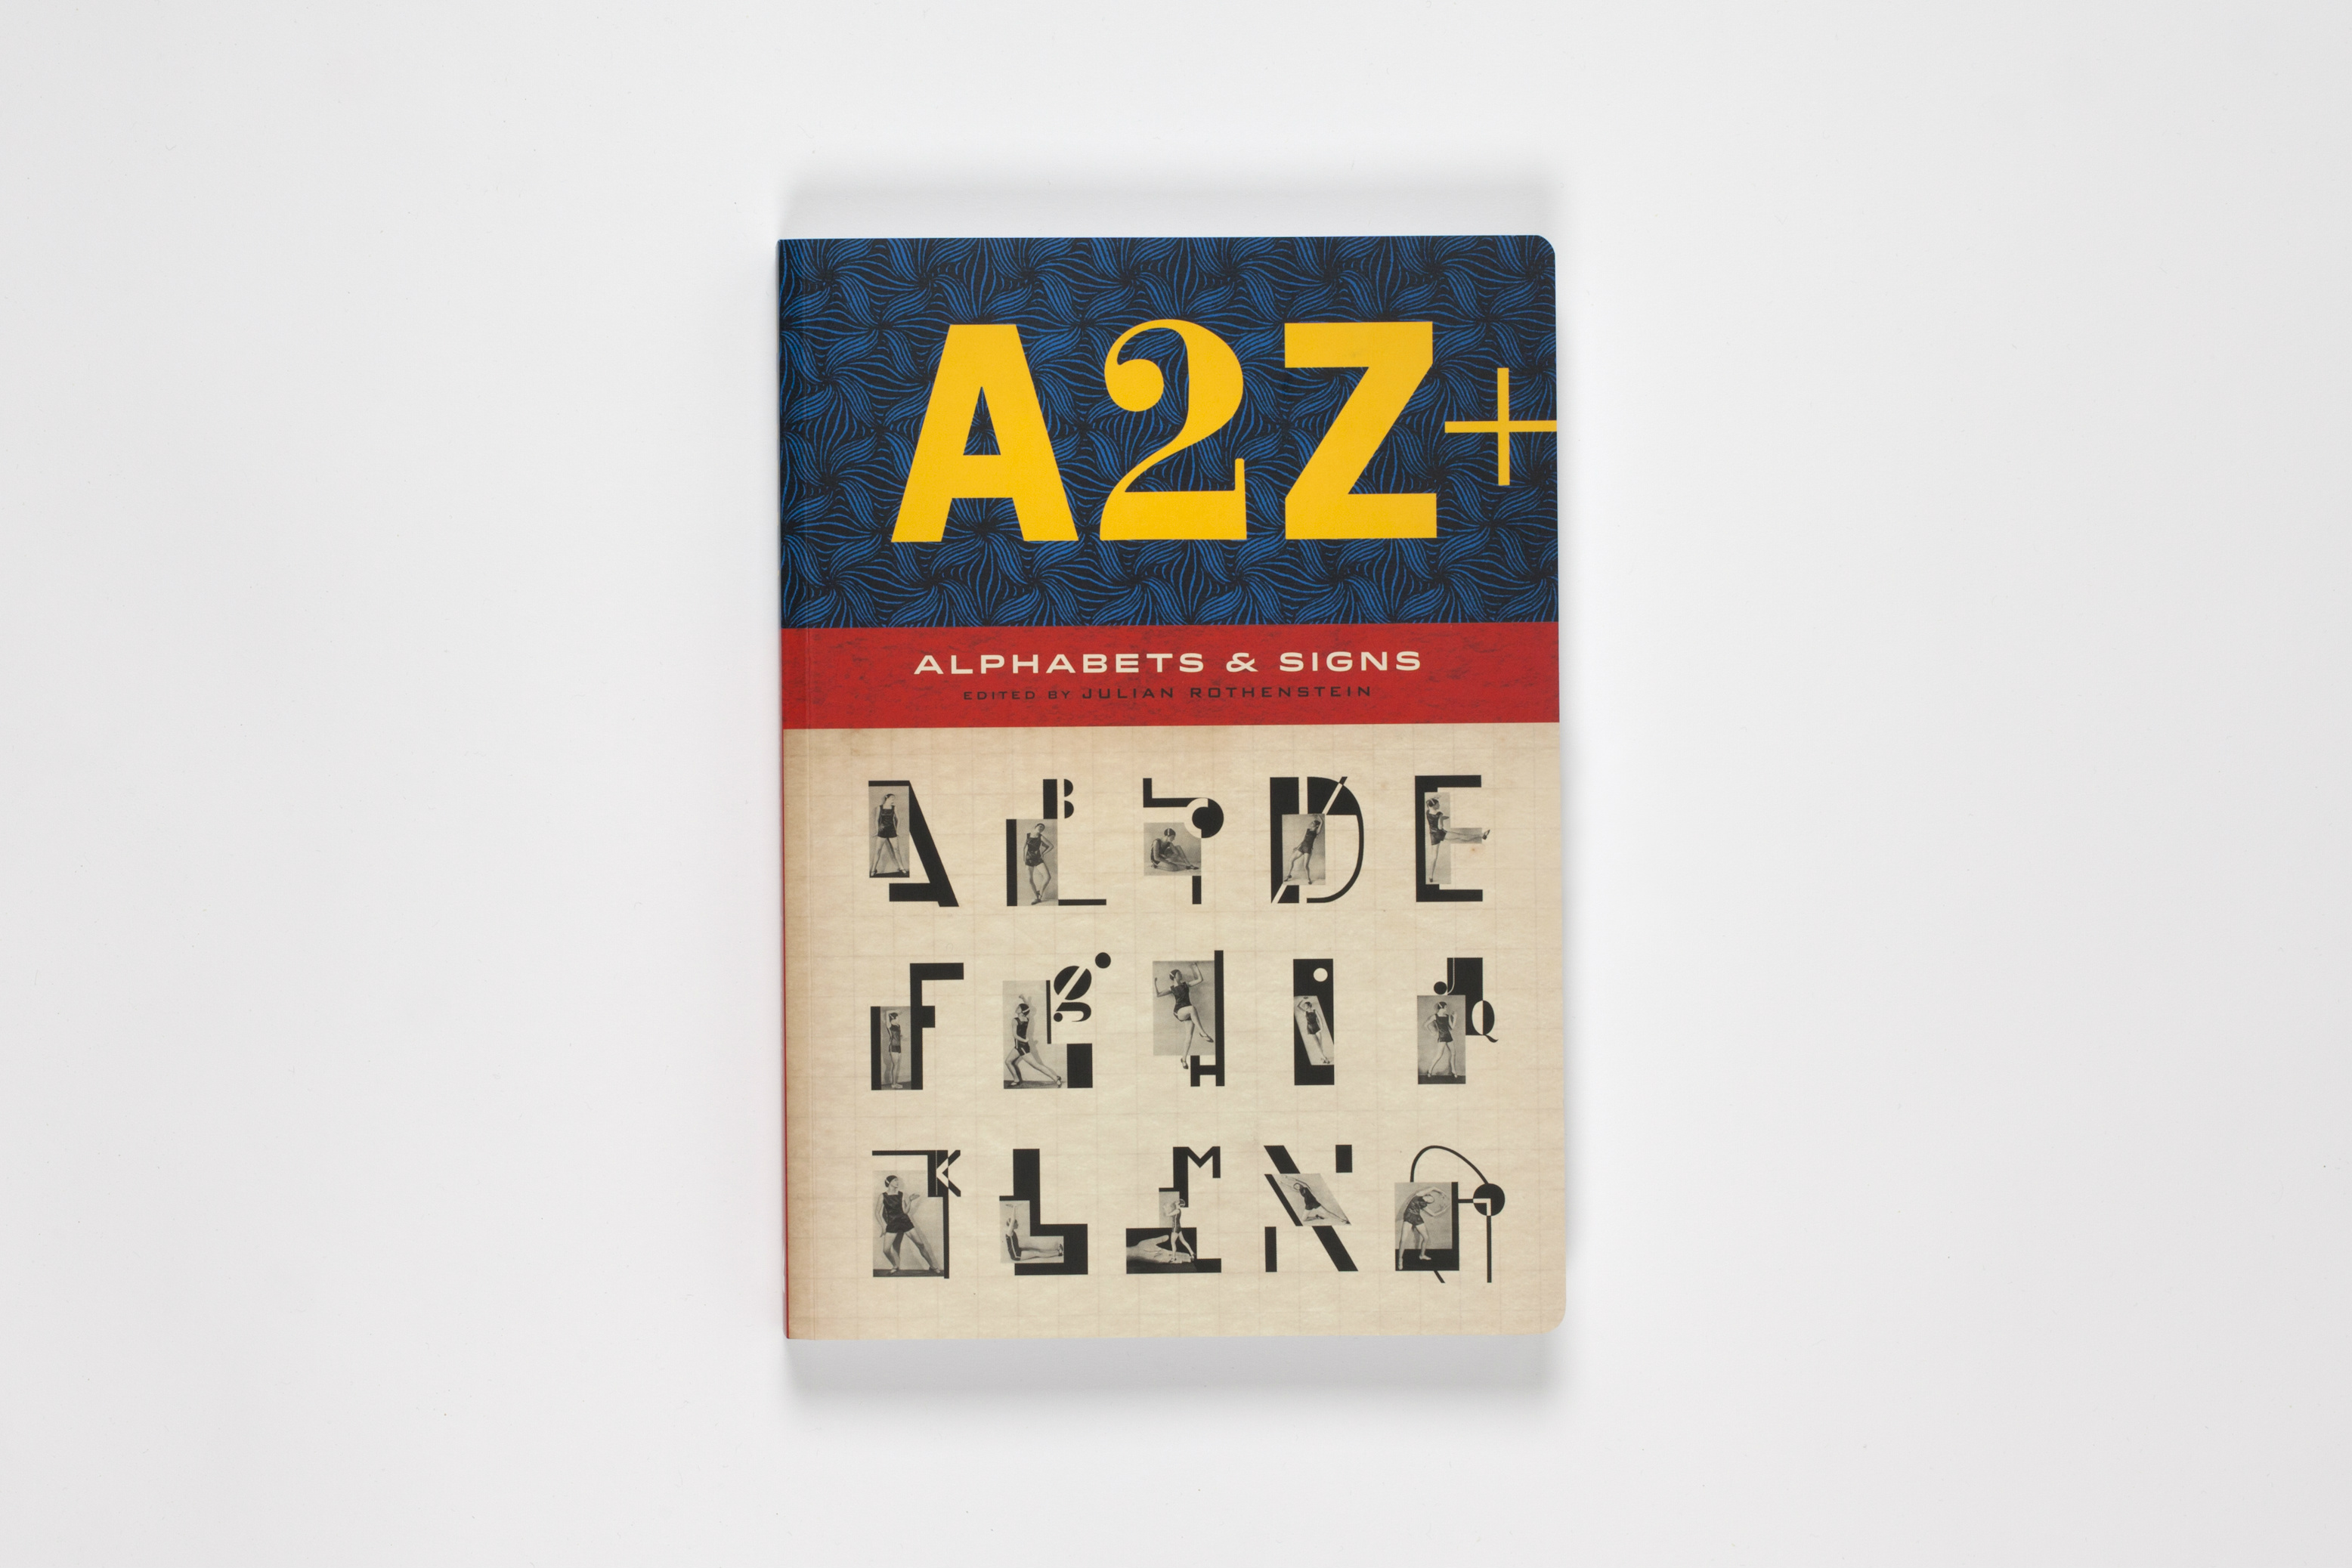 Full of rare and beautiful lettering, Alphabets and Signs is a book like no other